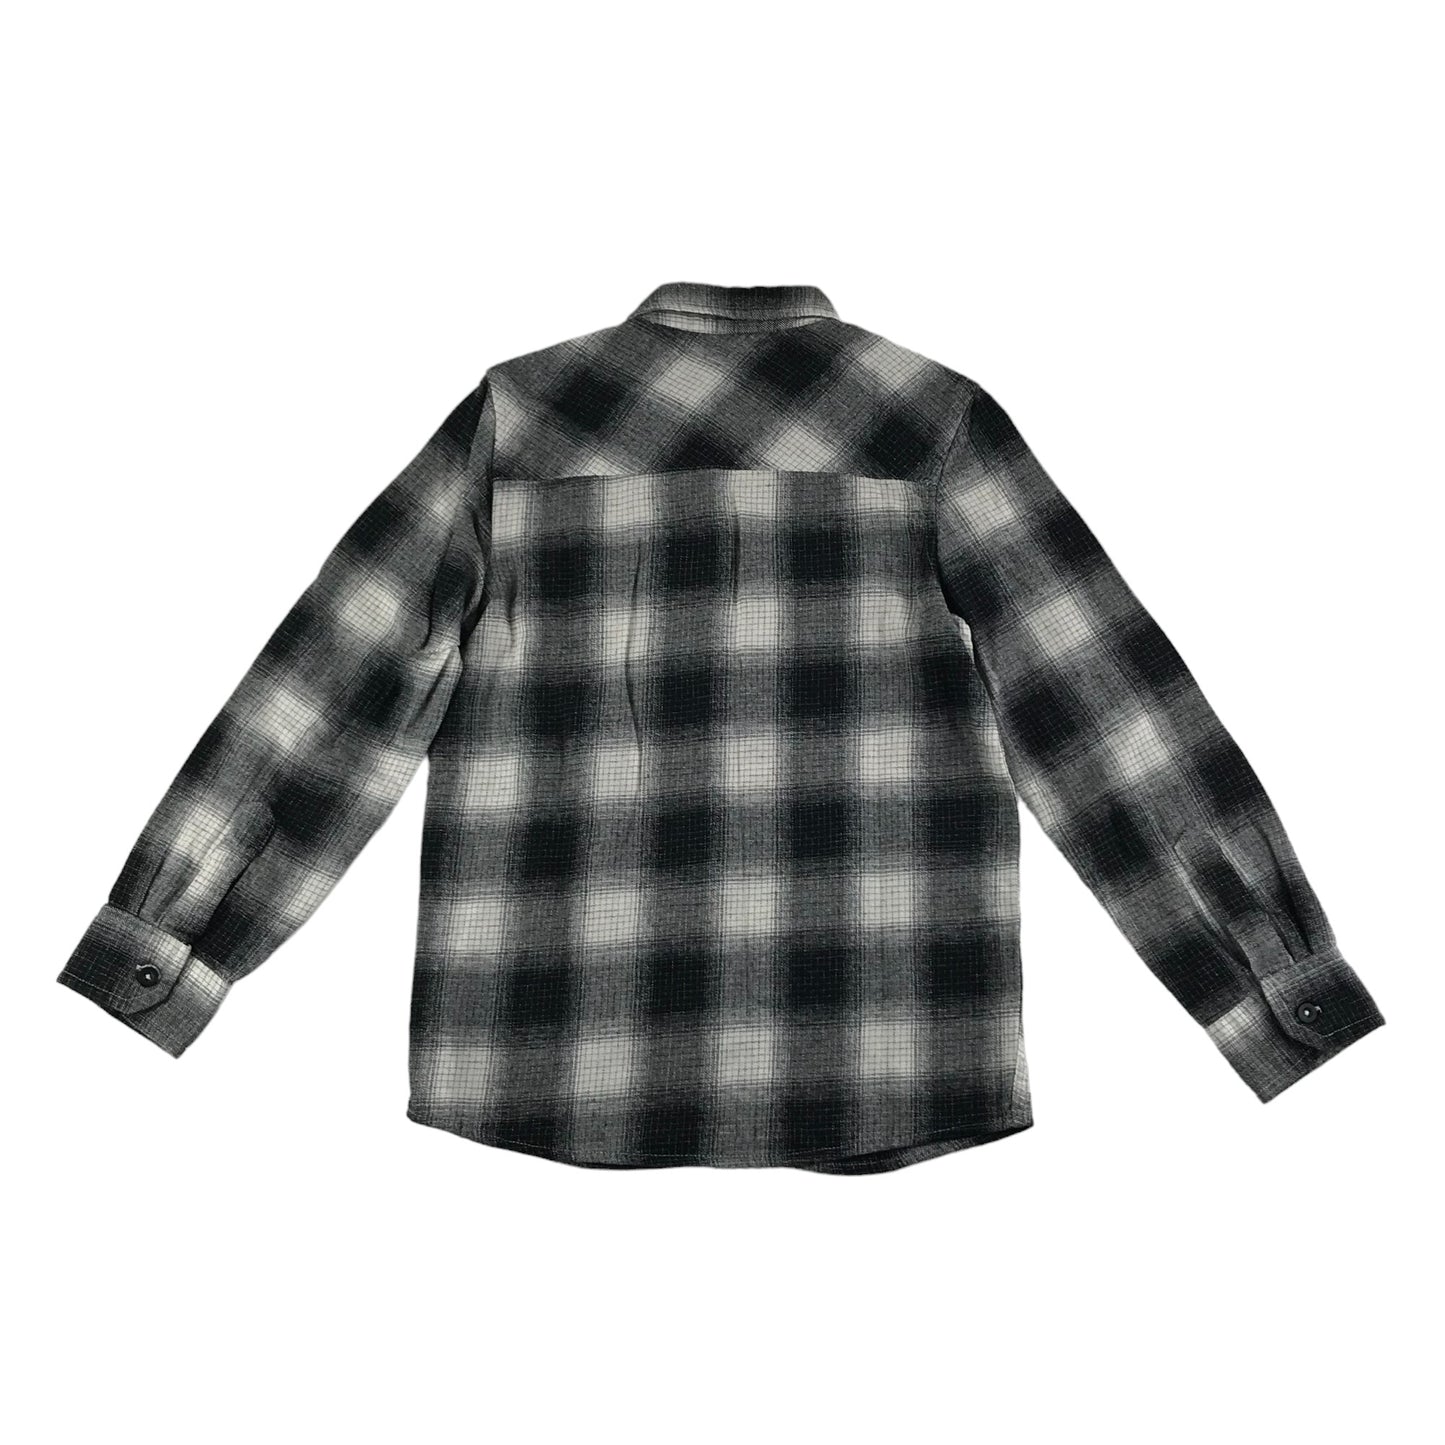 Tu Shirt Age 9 Black and White Checked Long Sleeve Button Up Cotton